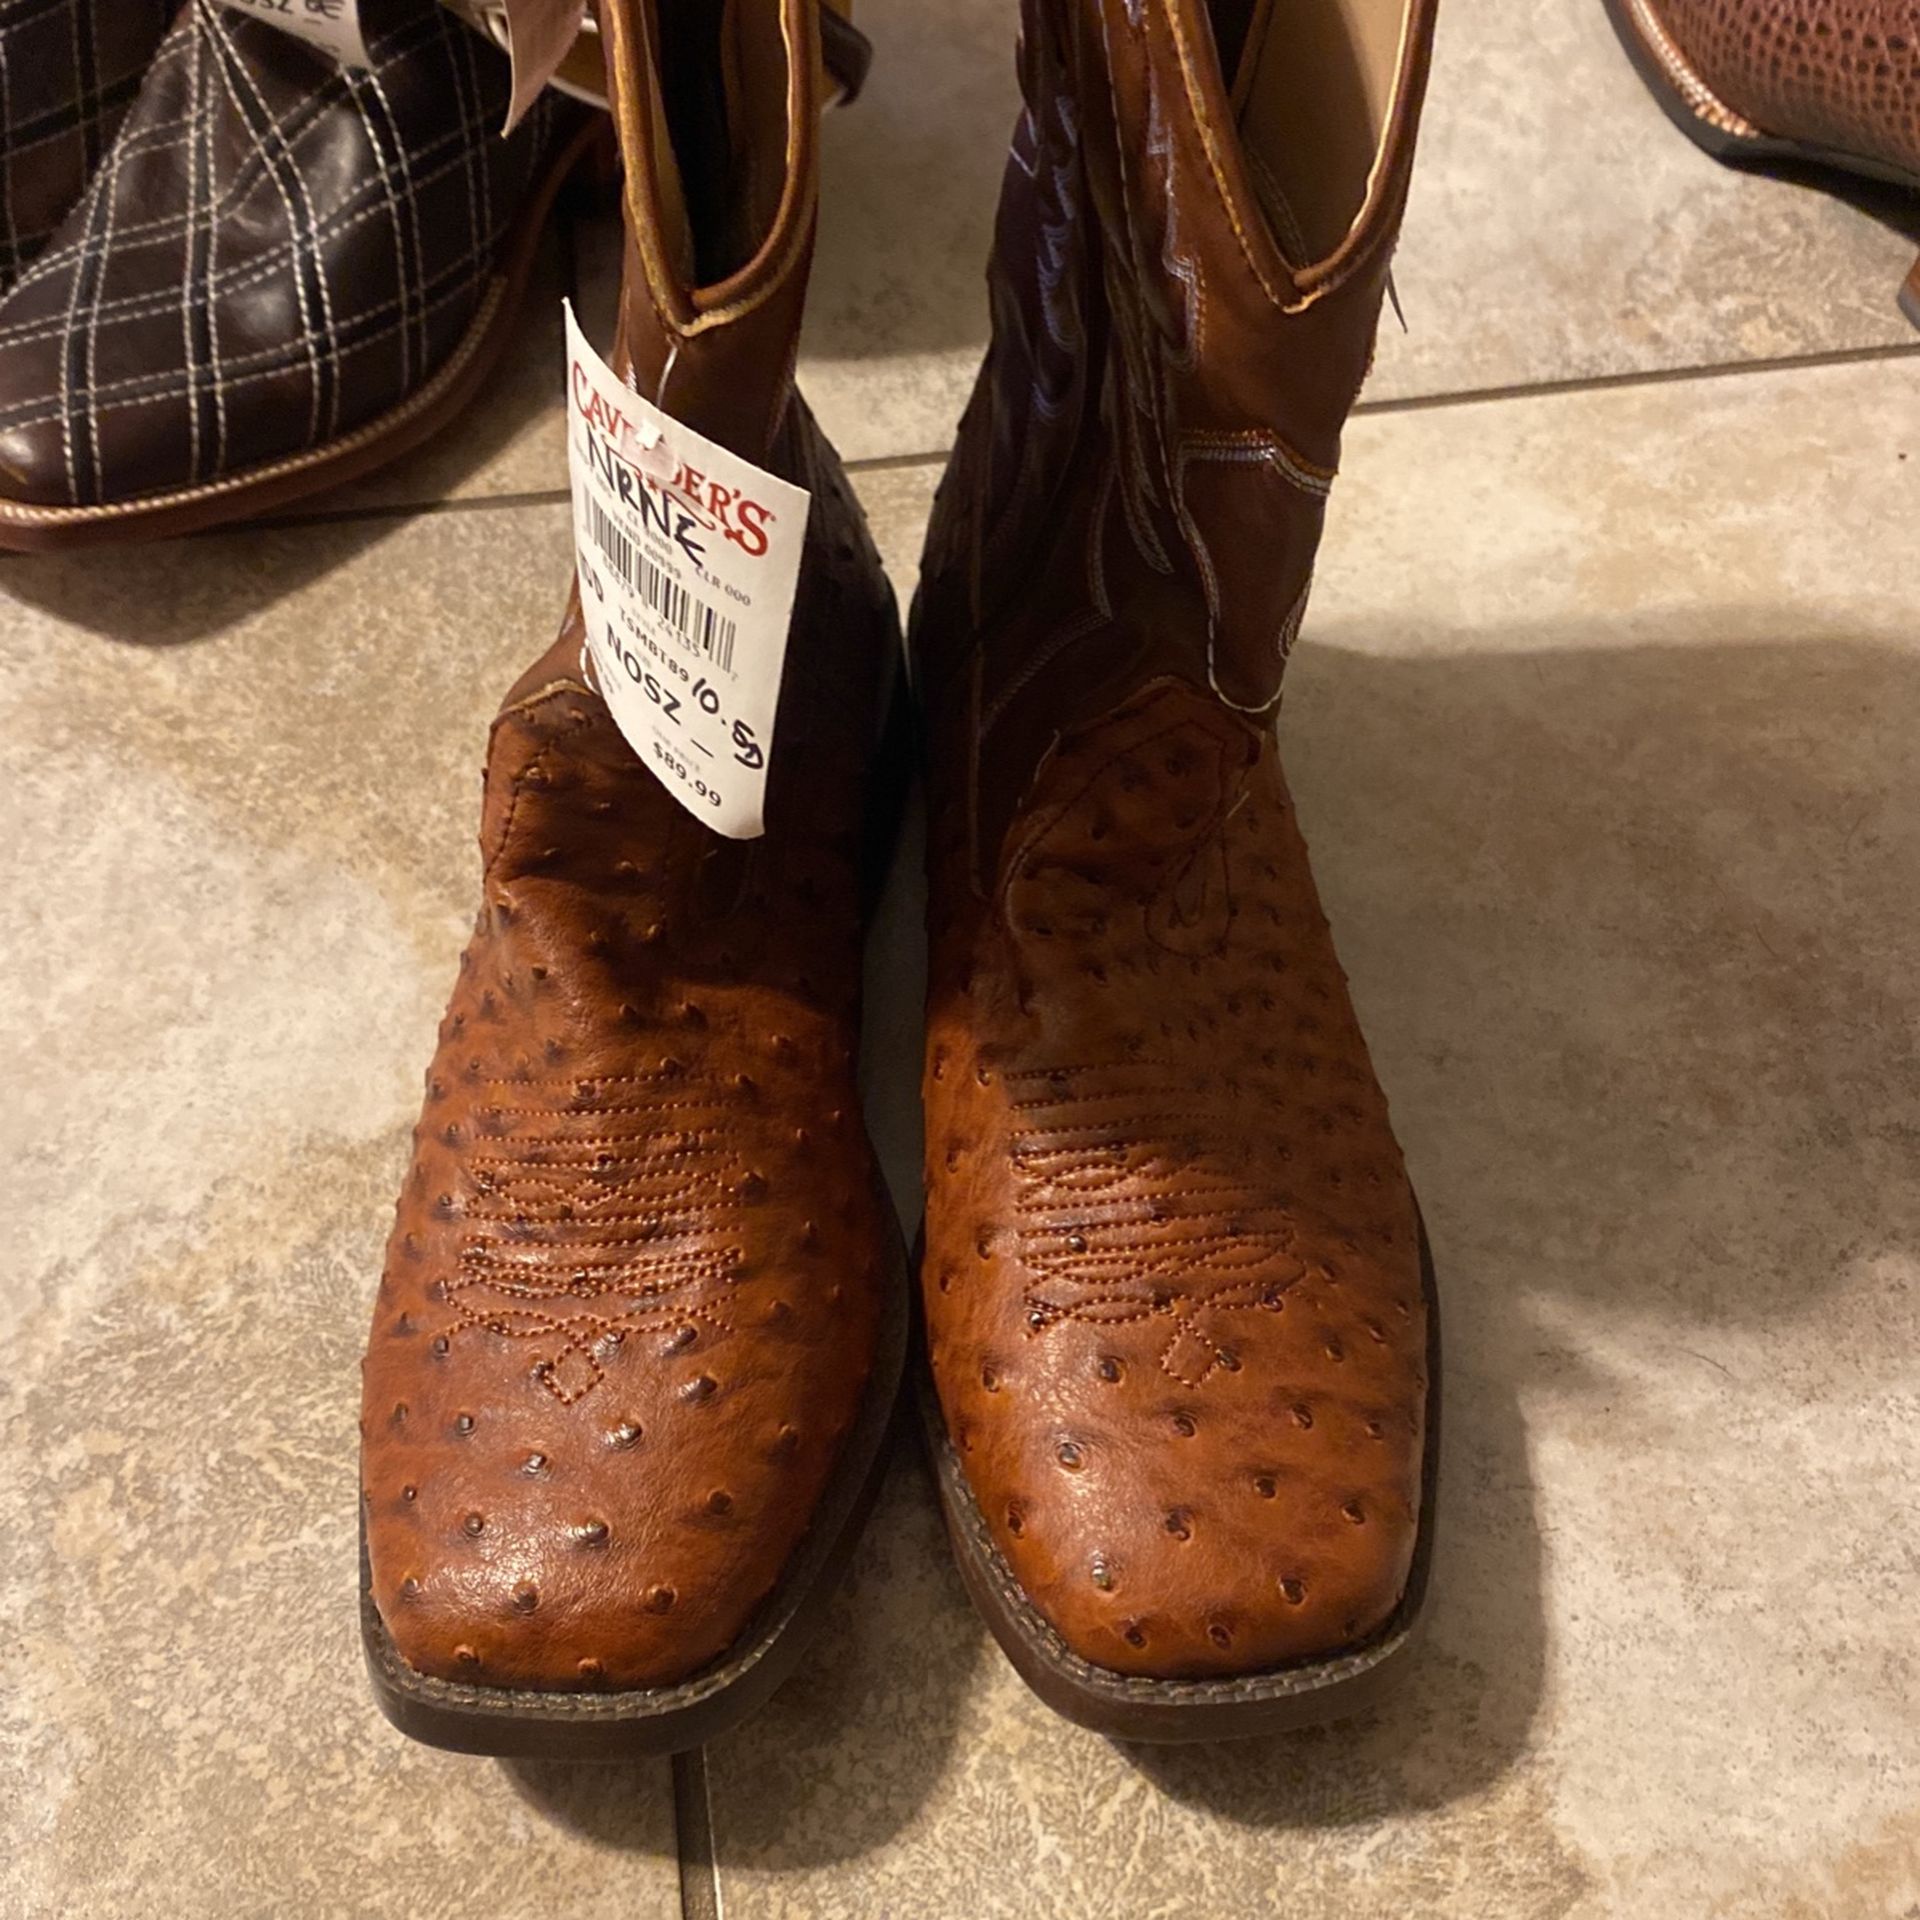 New Leather Print ROPER BOOTS 50.00 RIGHT IS Size 10 Left Is 10.5 You Can Barley Tell